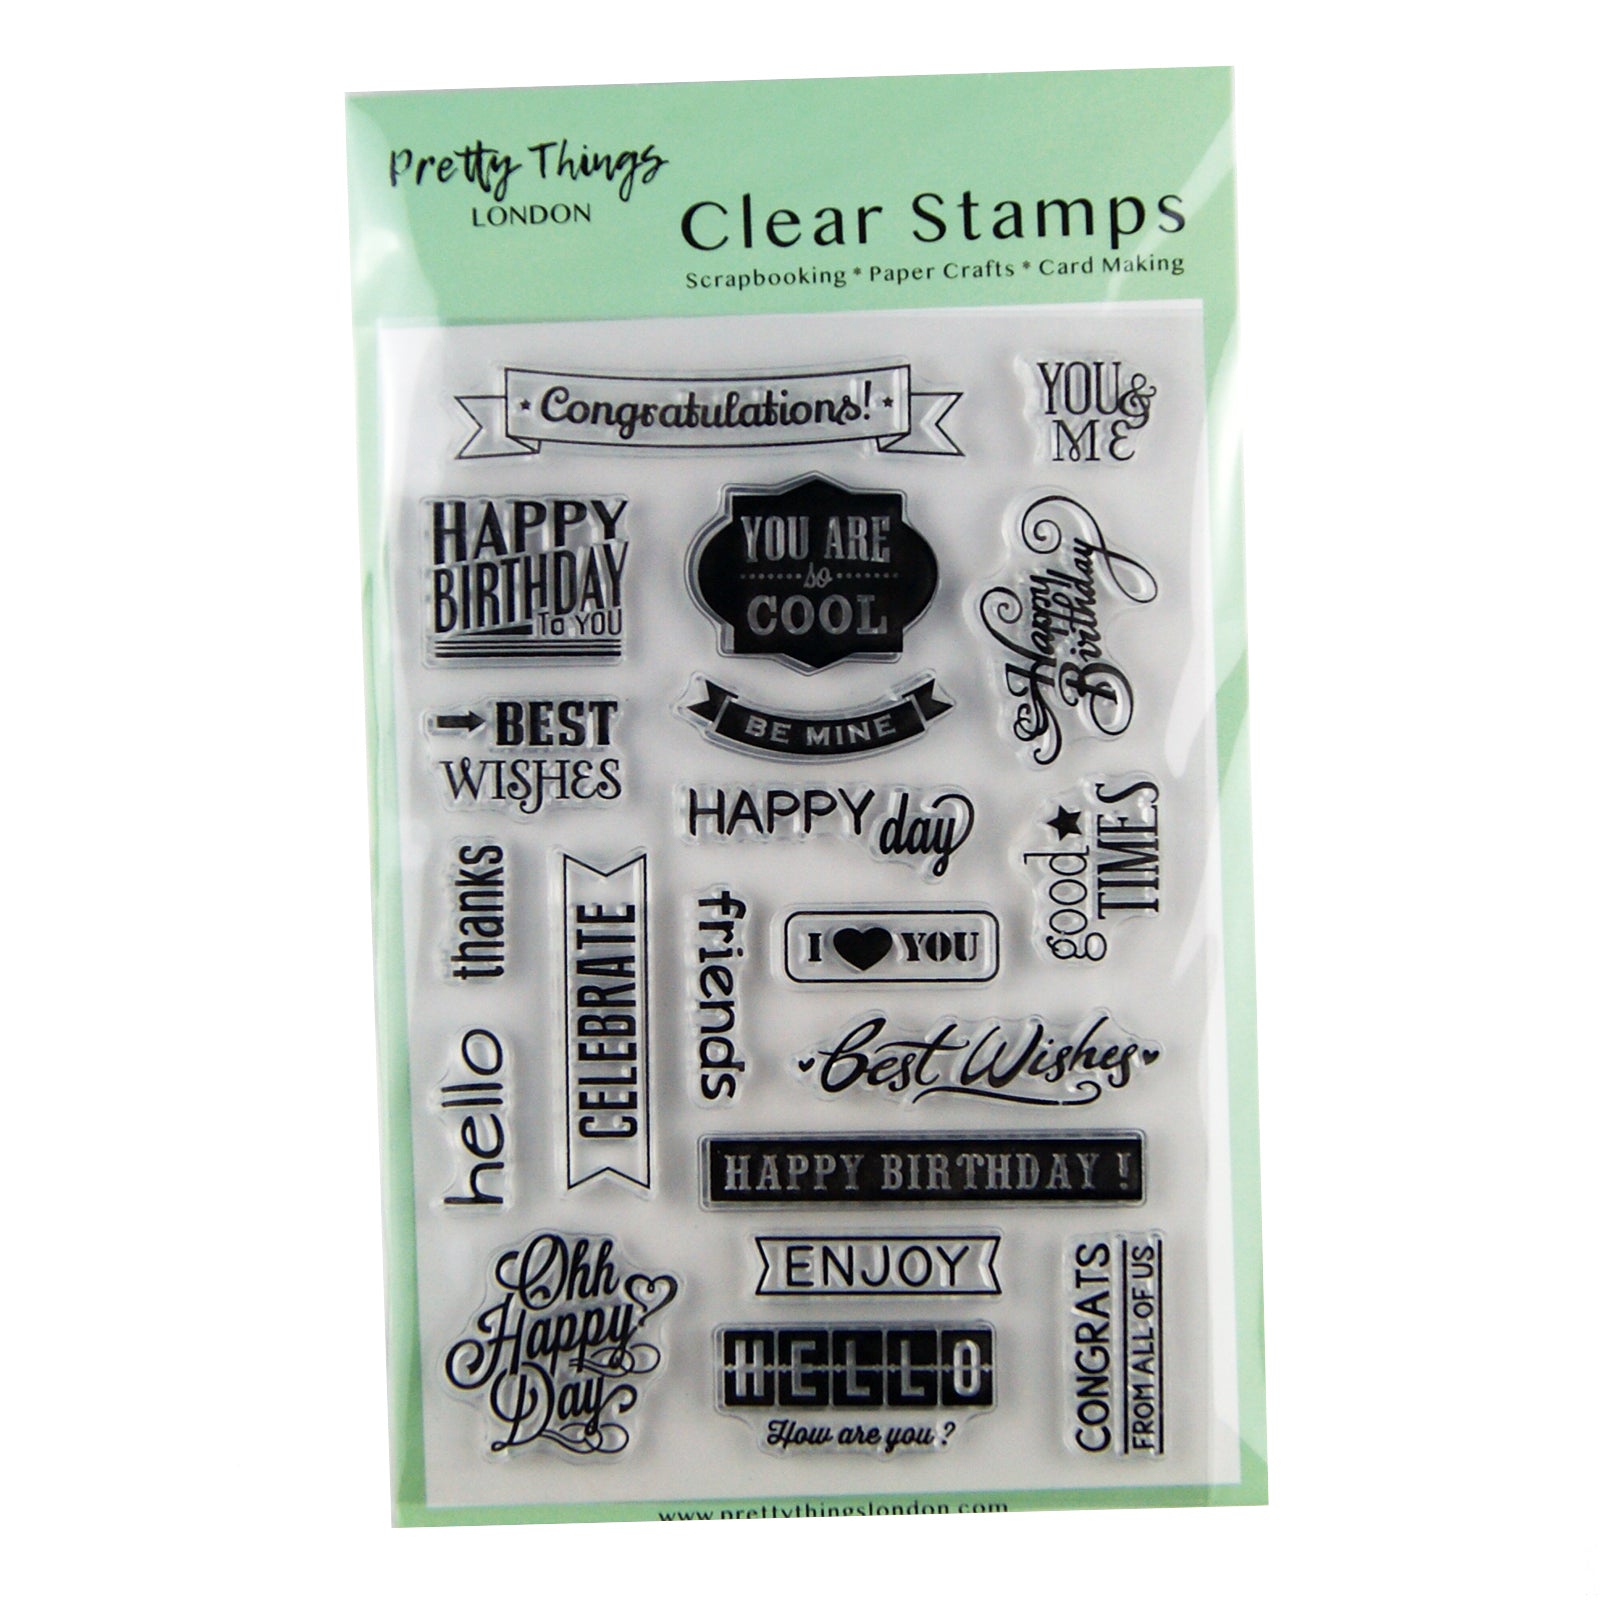 Clear Stamps various sentiments card making and scrapbooking